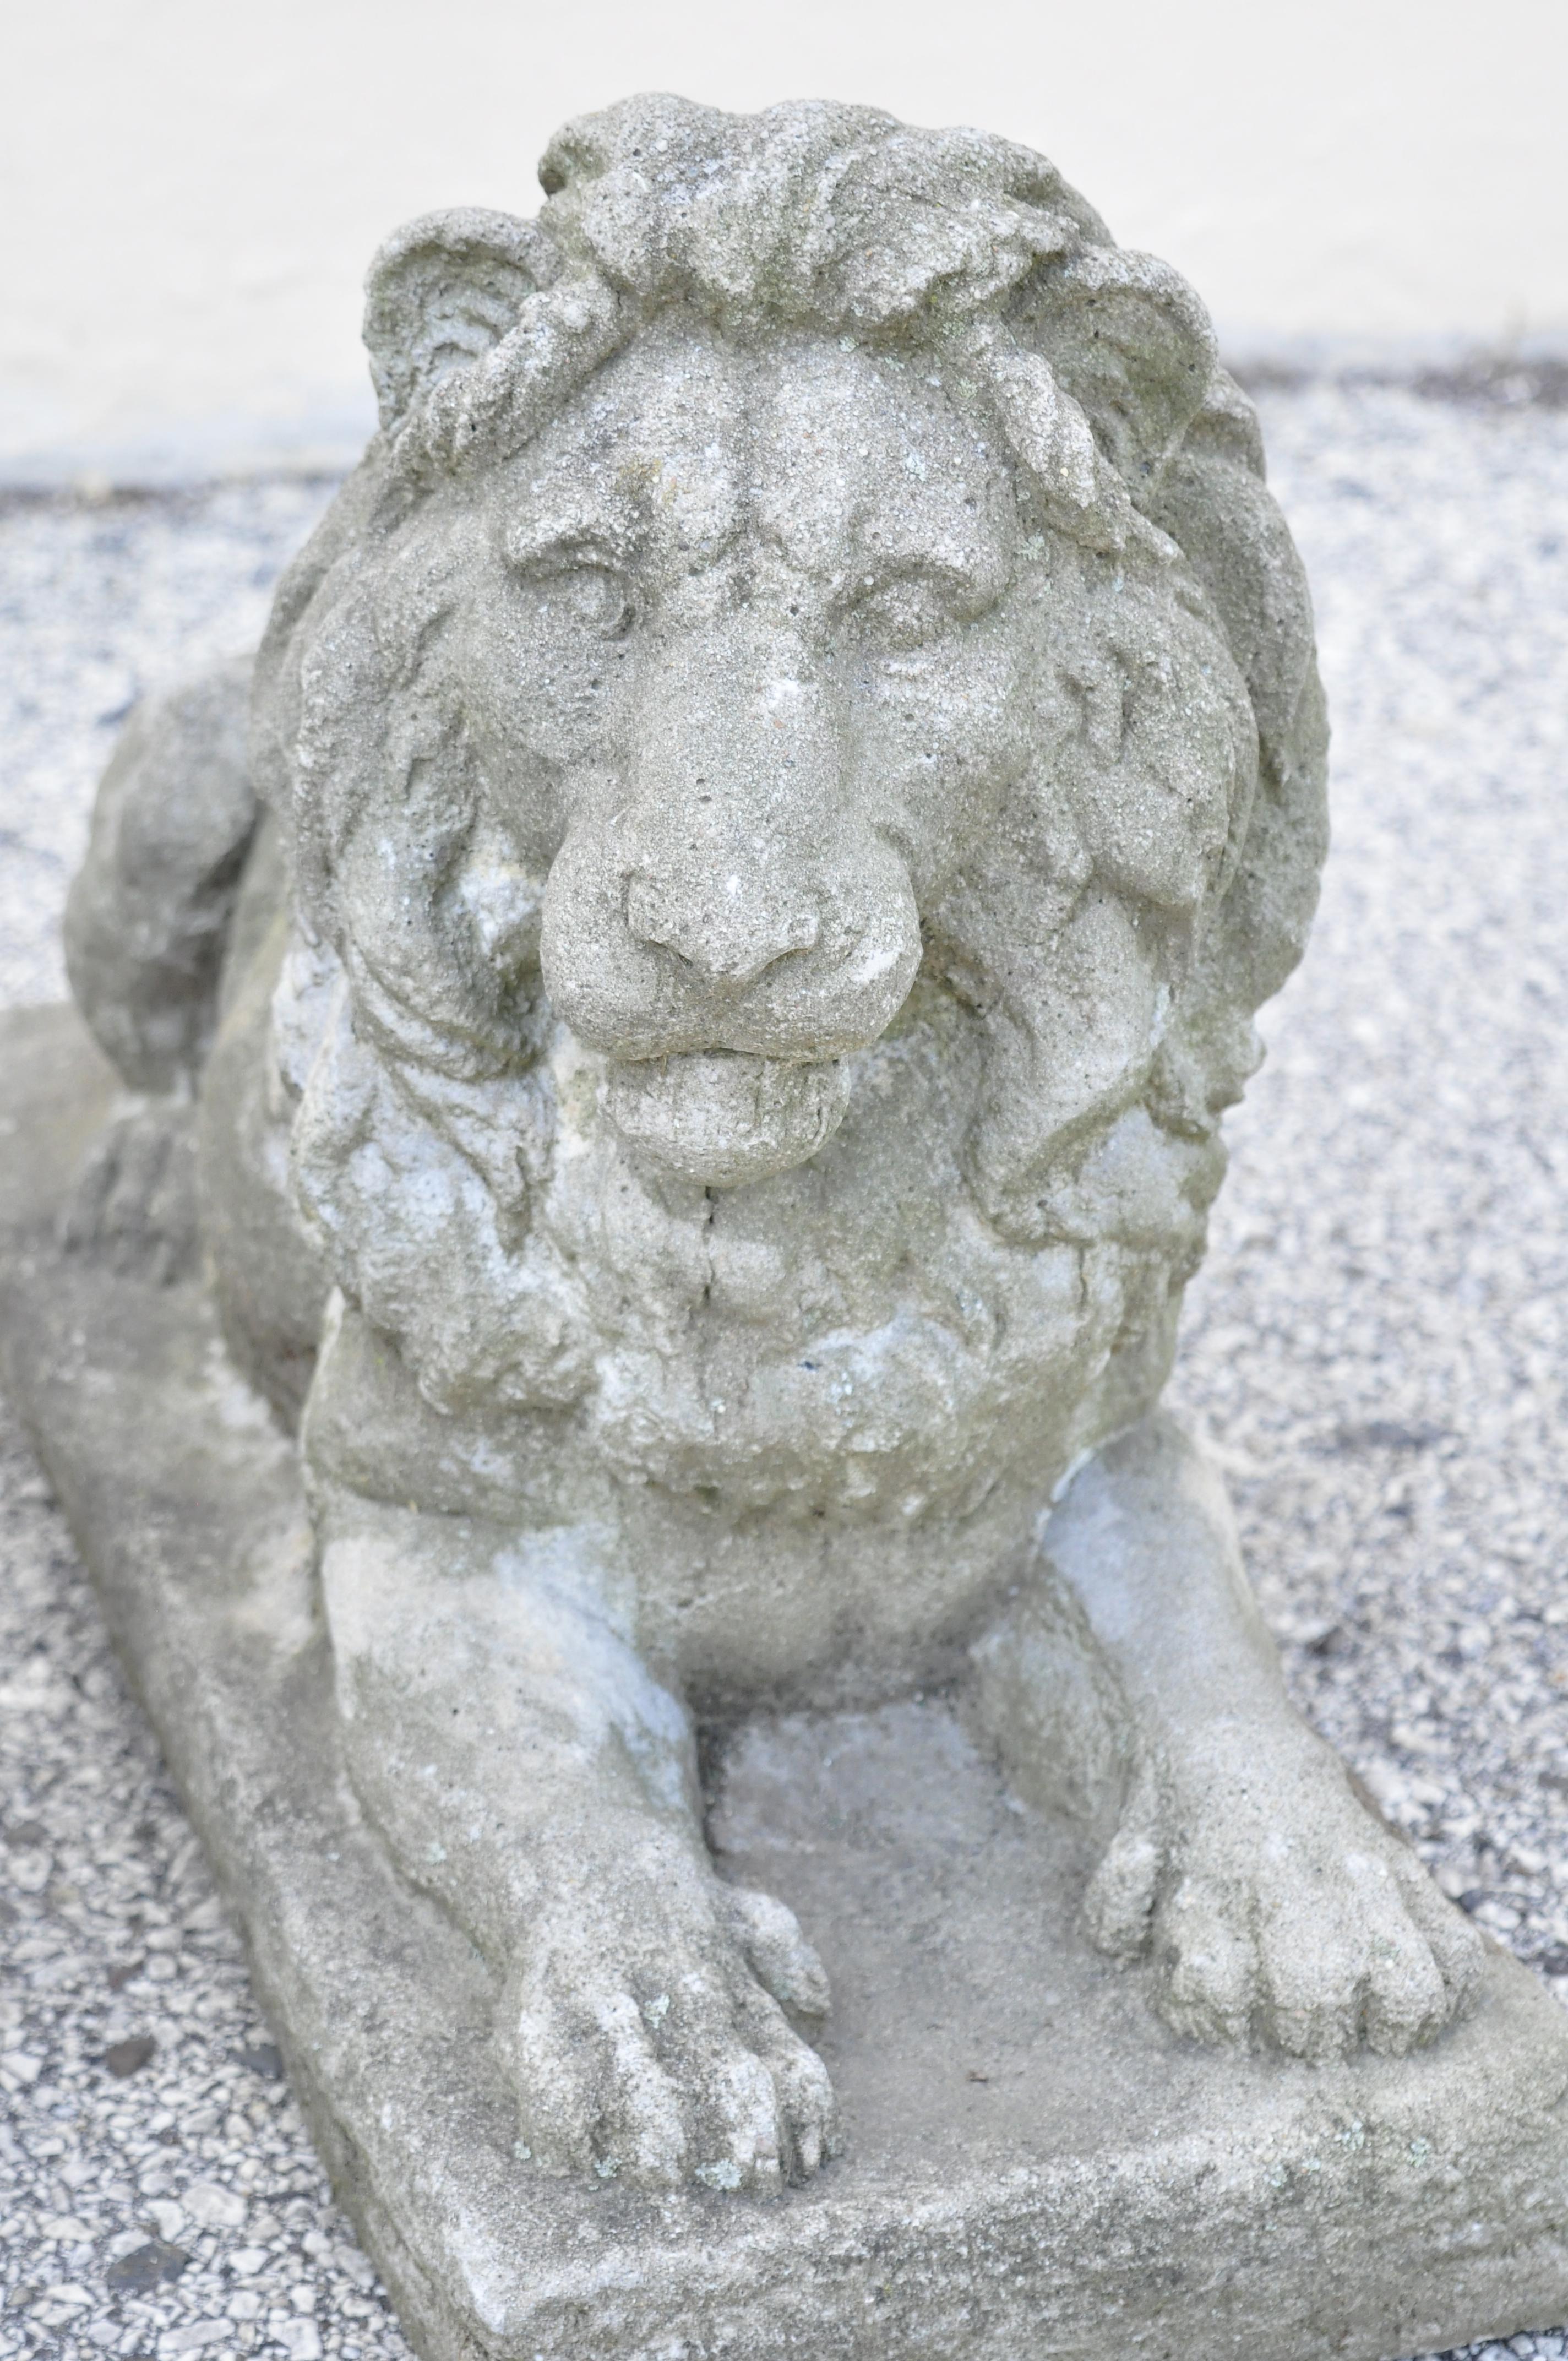 Antique classical concrete reclining resting lion garden statue ornament - a pair. Item features right and left facing, remarkable cast concrete stone details, authentic aged patina, quality craftsmanship. Approx. 120 lbs each. Age: Early 1900s.